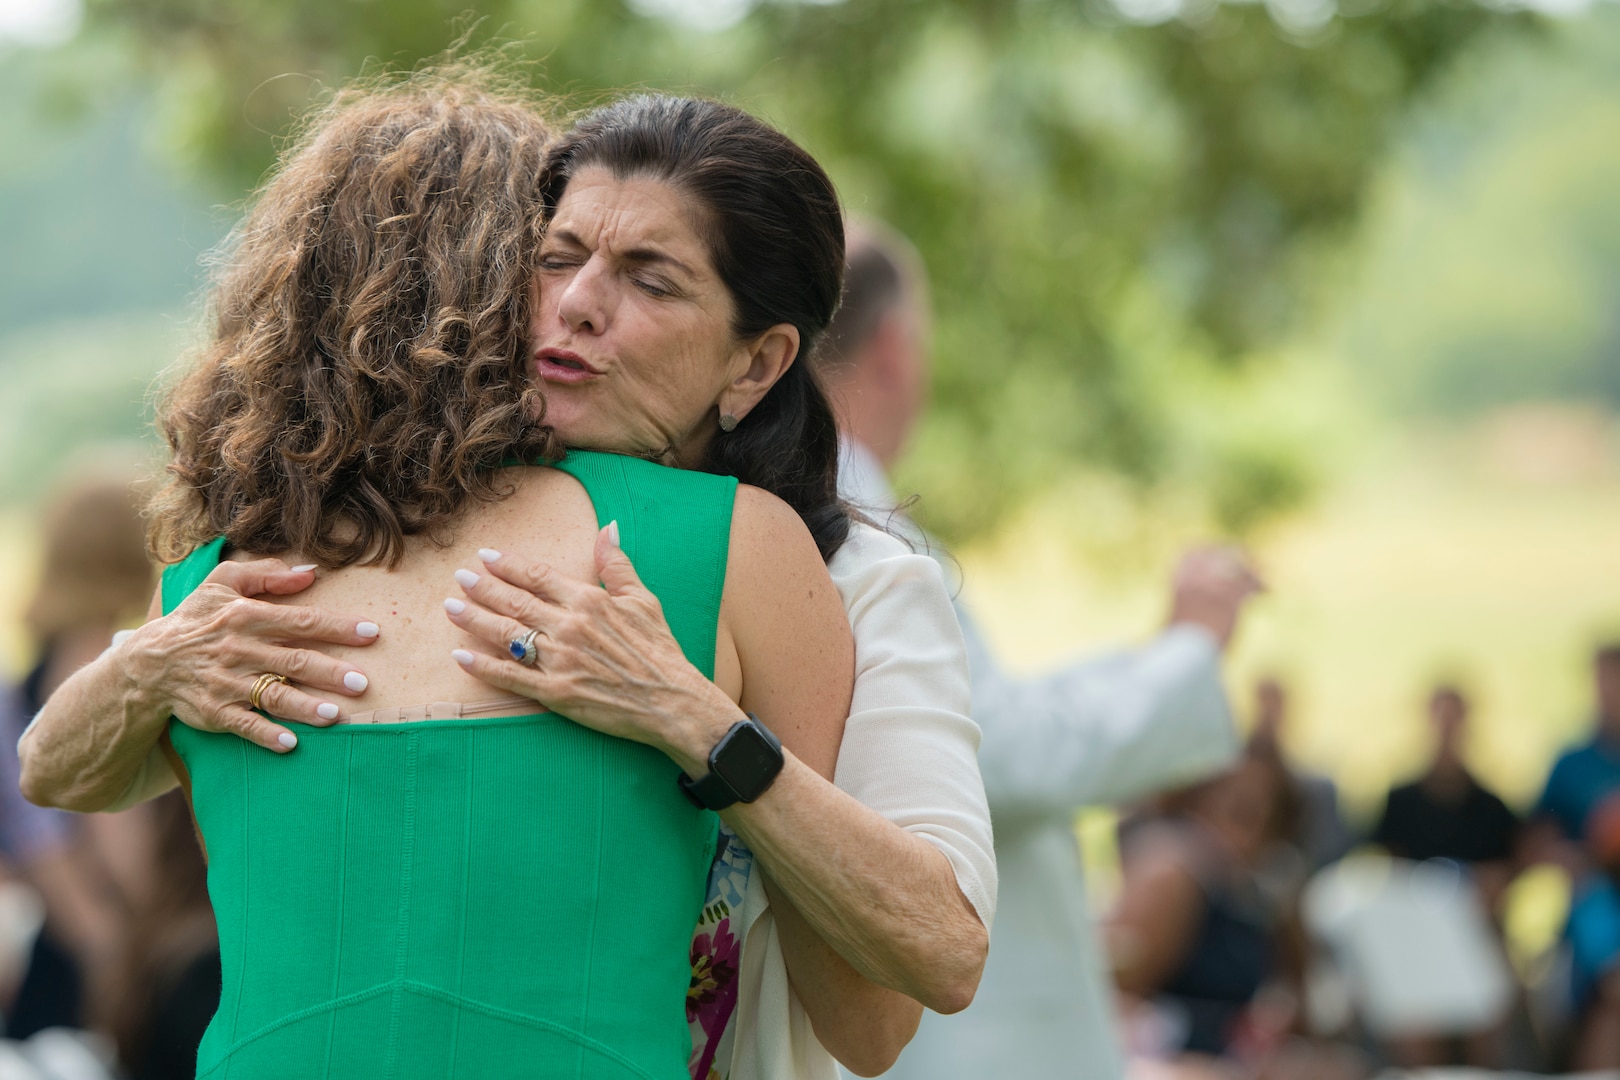 Luci Baines Johnson (right), Lyndon B. Johnson’s daughter, hugs her niece Catherine Robb, at the Lyndon B. Johnson Birthday Observance Wreath-Laying Ceremony Aug. 27 at the LBJ National Historical Park at Johnson City, Texas.The annual event honors what would have been Johnson’s 111th birthday.